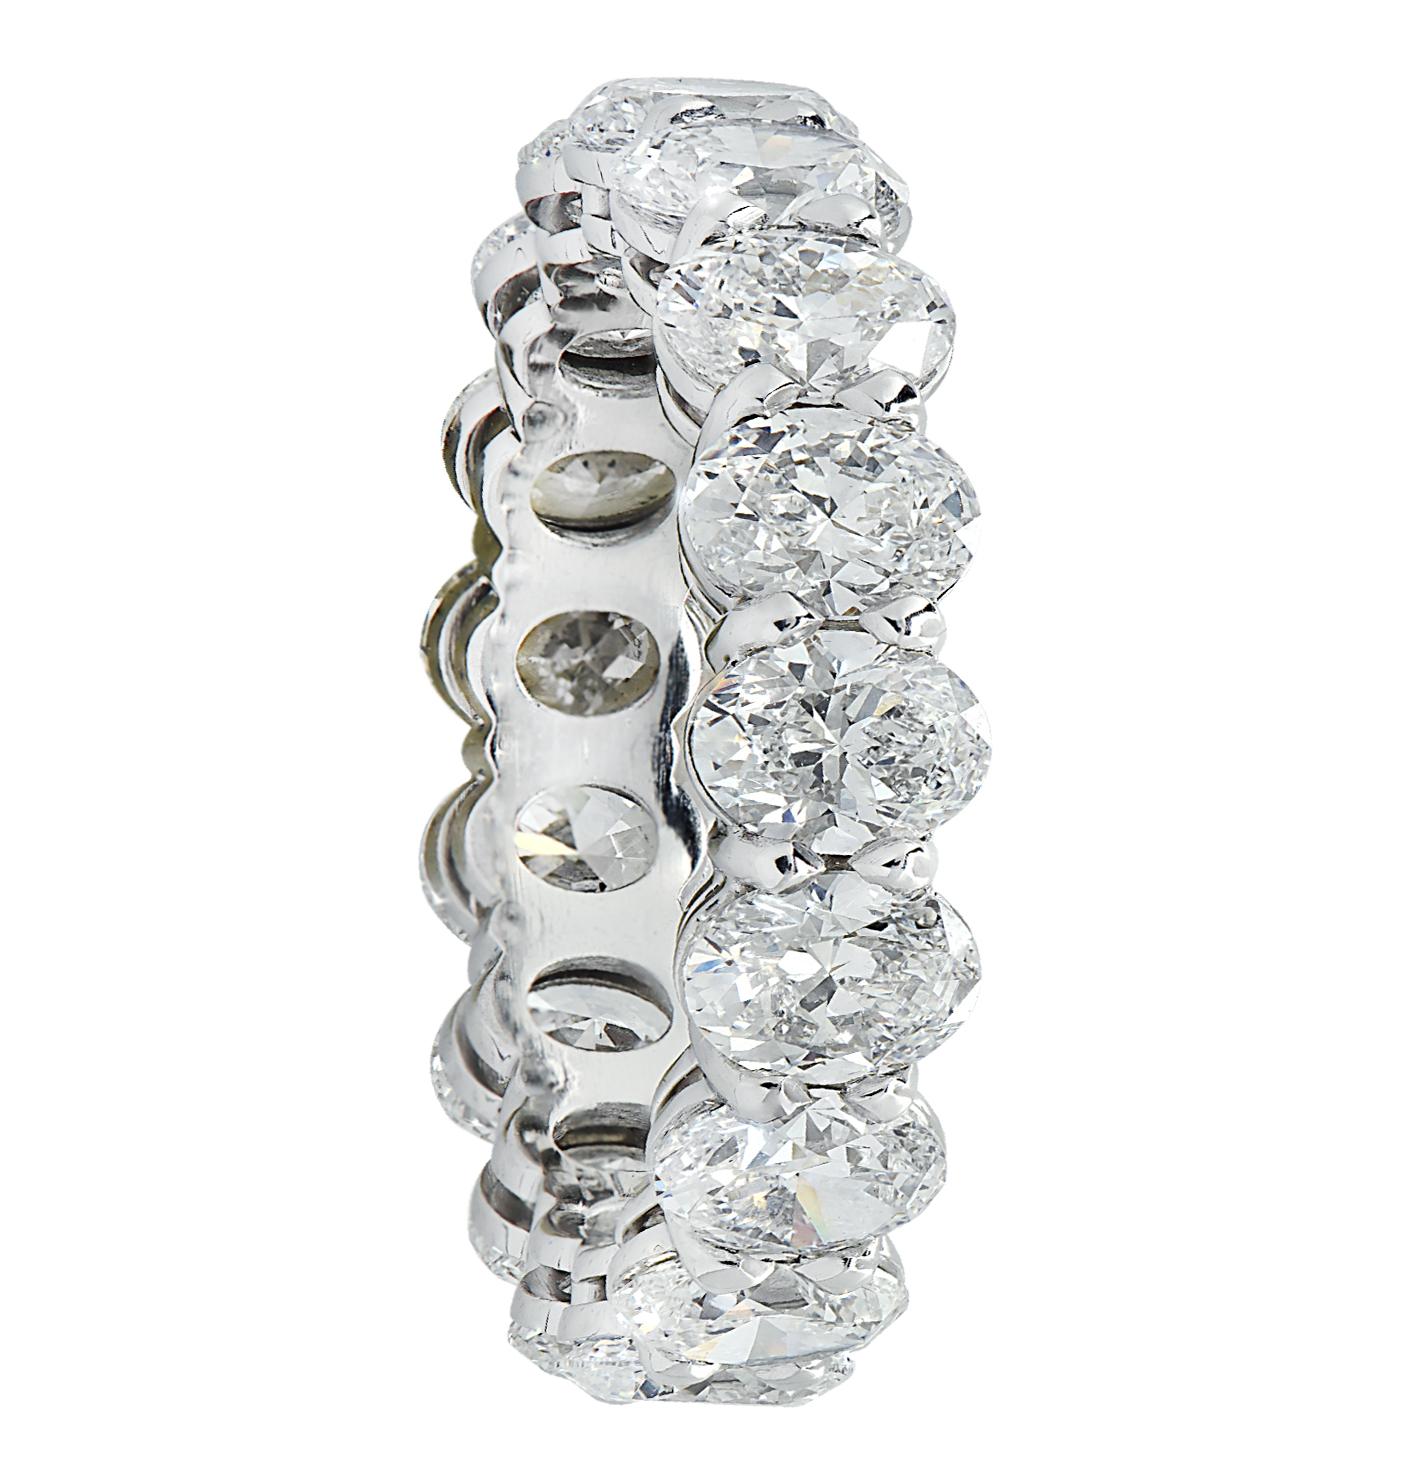 Exquisite Vivid Diamonds eternity band crafted in Platinum, showcasing 17 stunning GIA certified oval diamonds weighing 5.10 carats total, F-G color, VS1-VS2 clarity. Each diamond was carefully selected, perfectly matched and set in a seamless sea